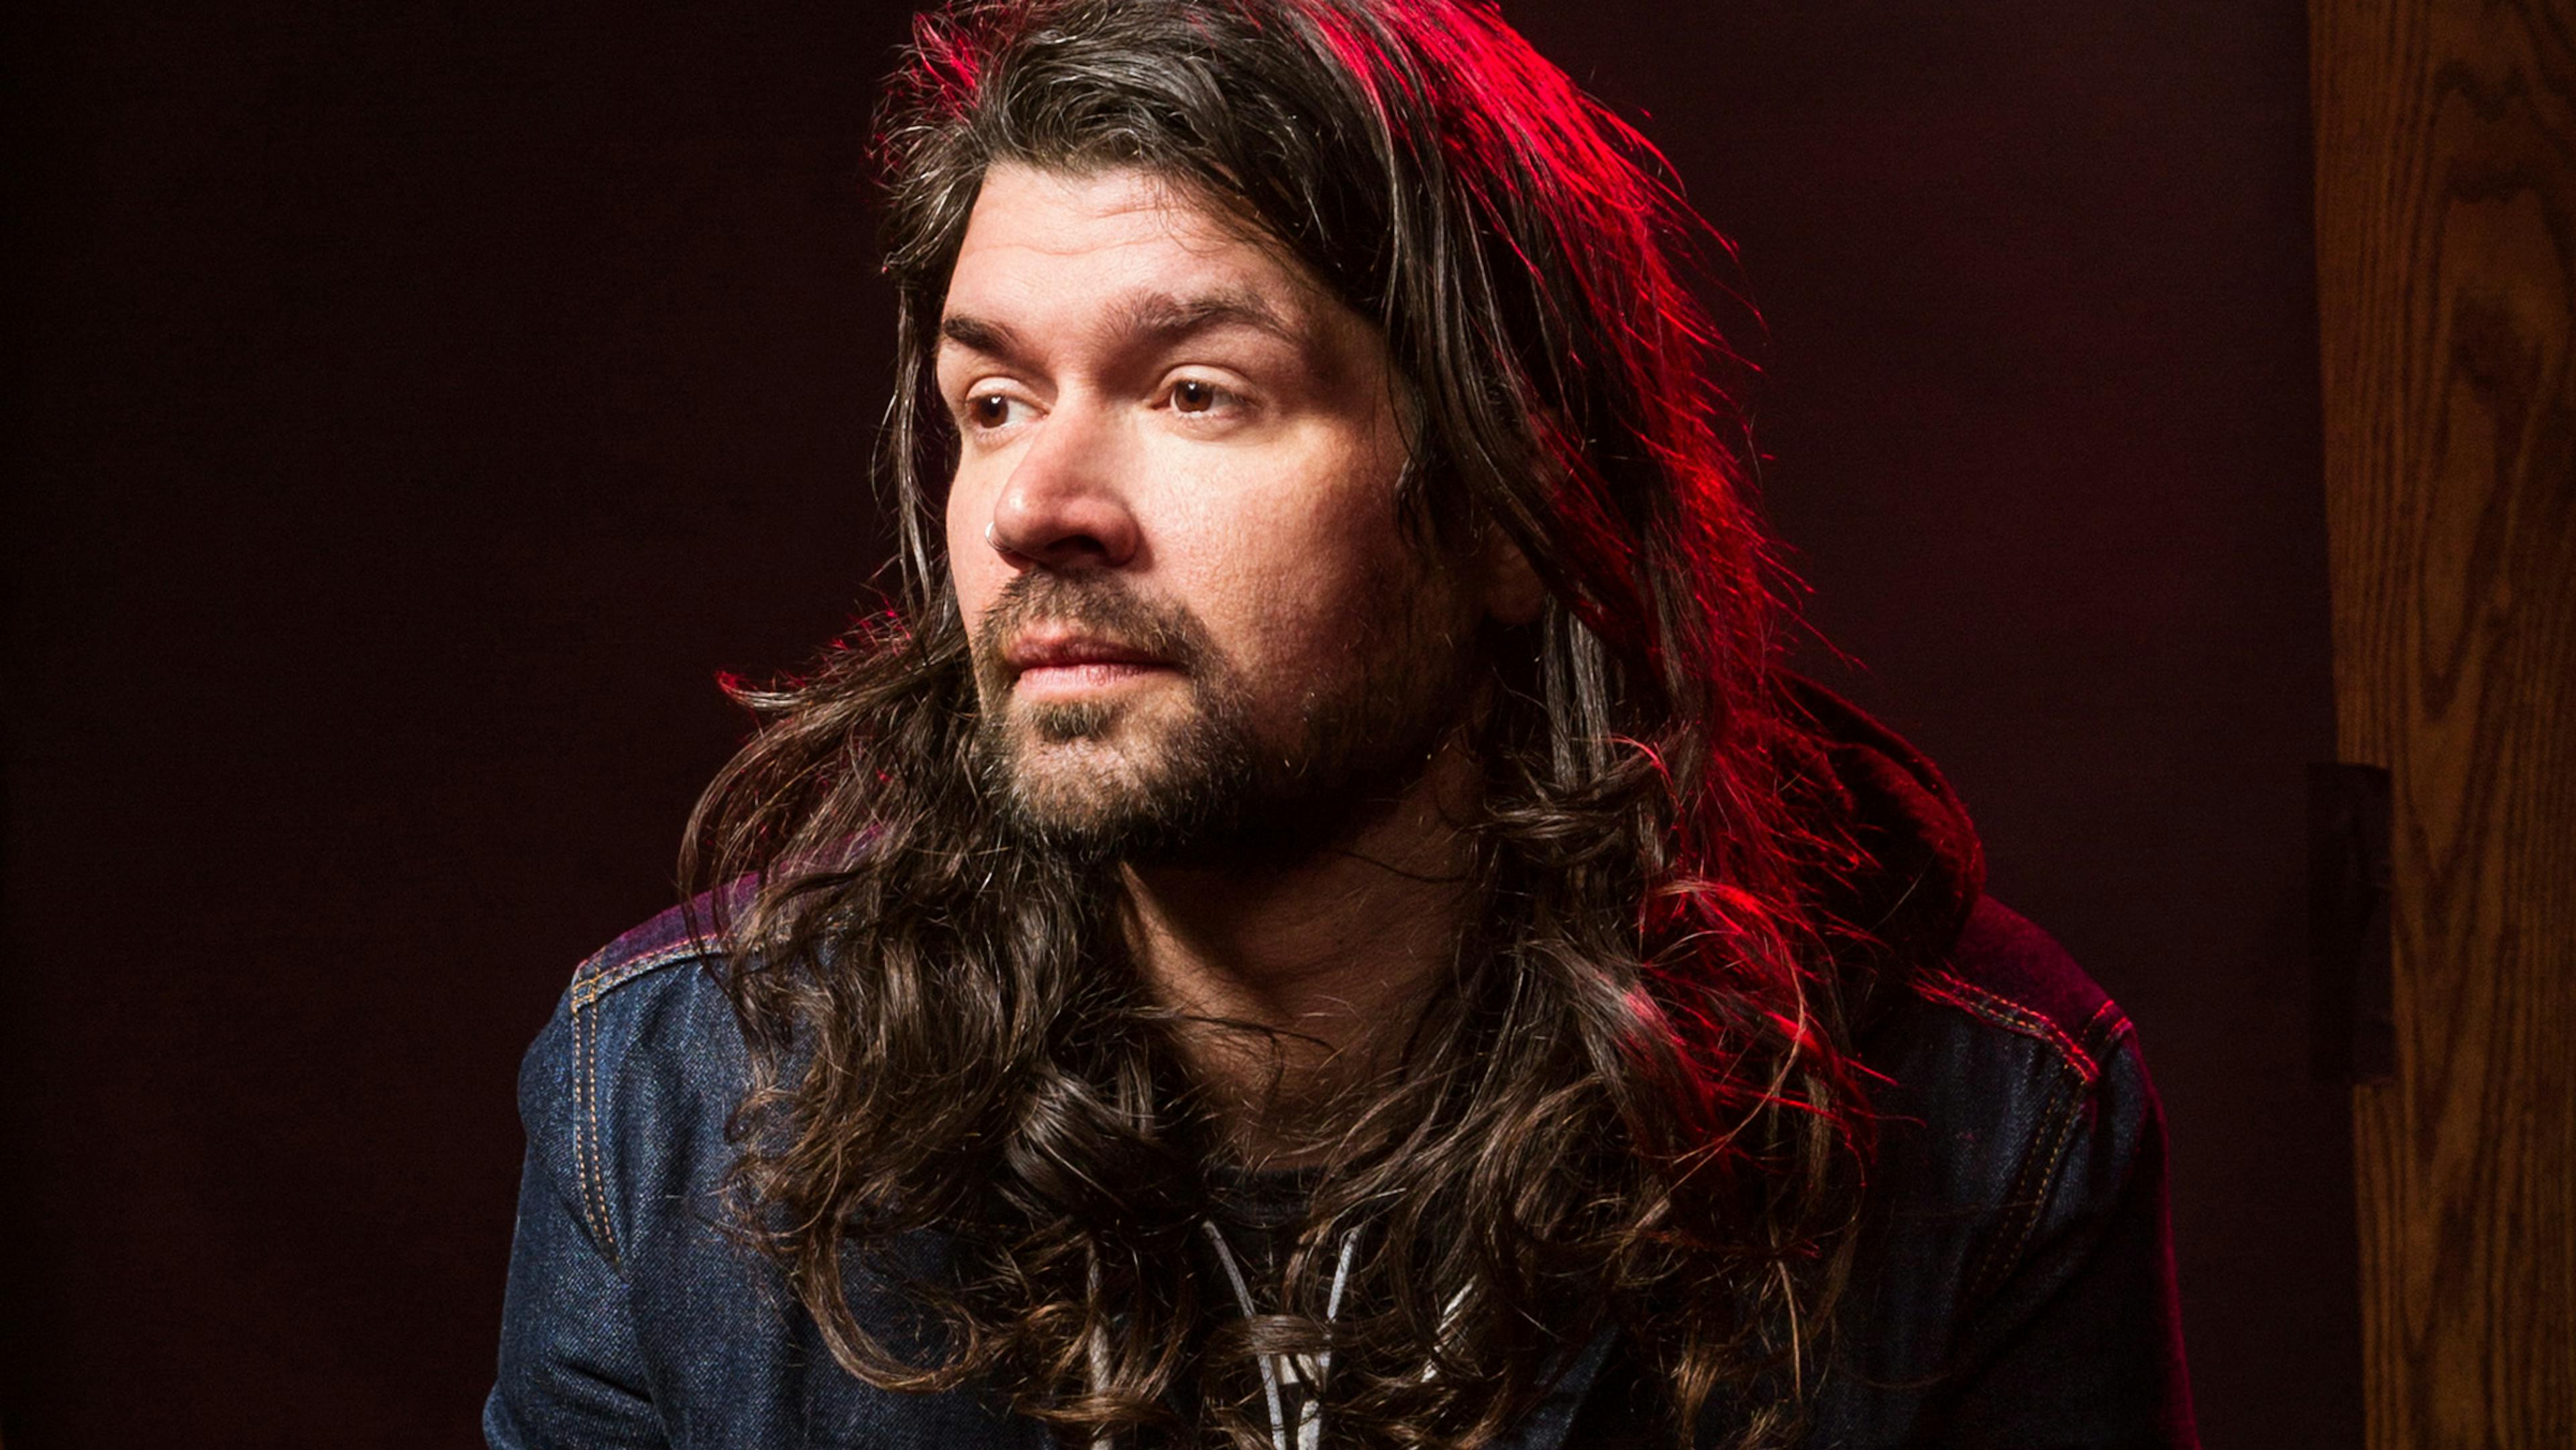 Adam Lazzara: “Sometimes you don’t want to remember the person you used to be... but it helps to make peace with yourself”